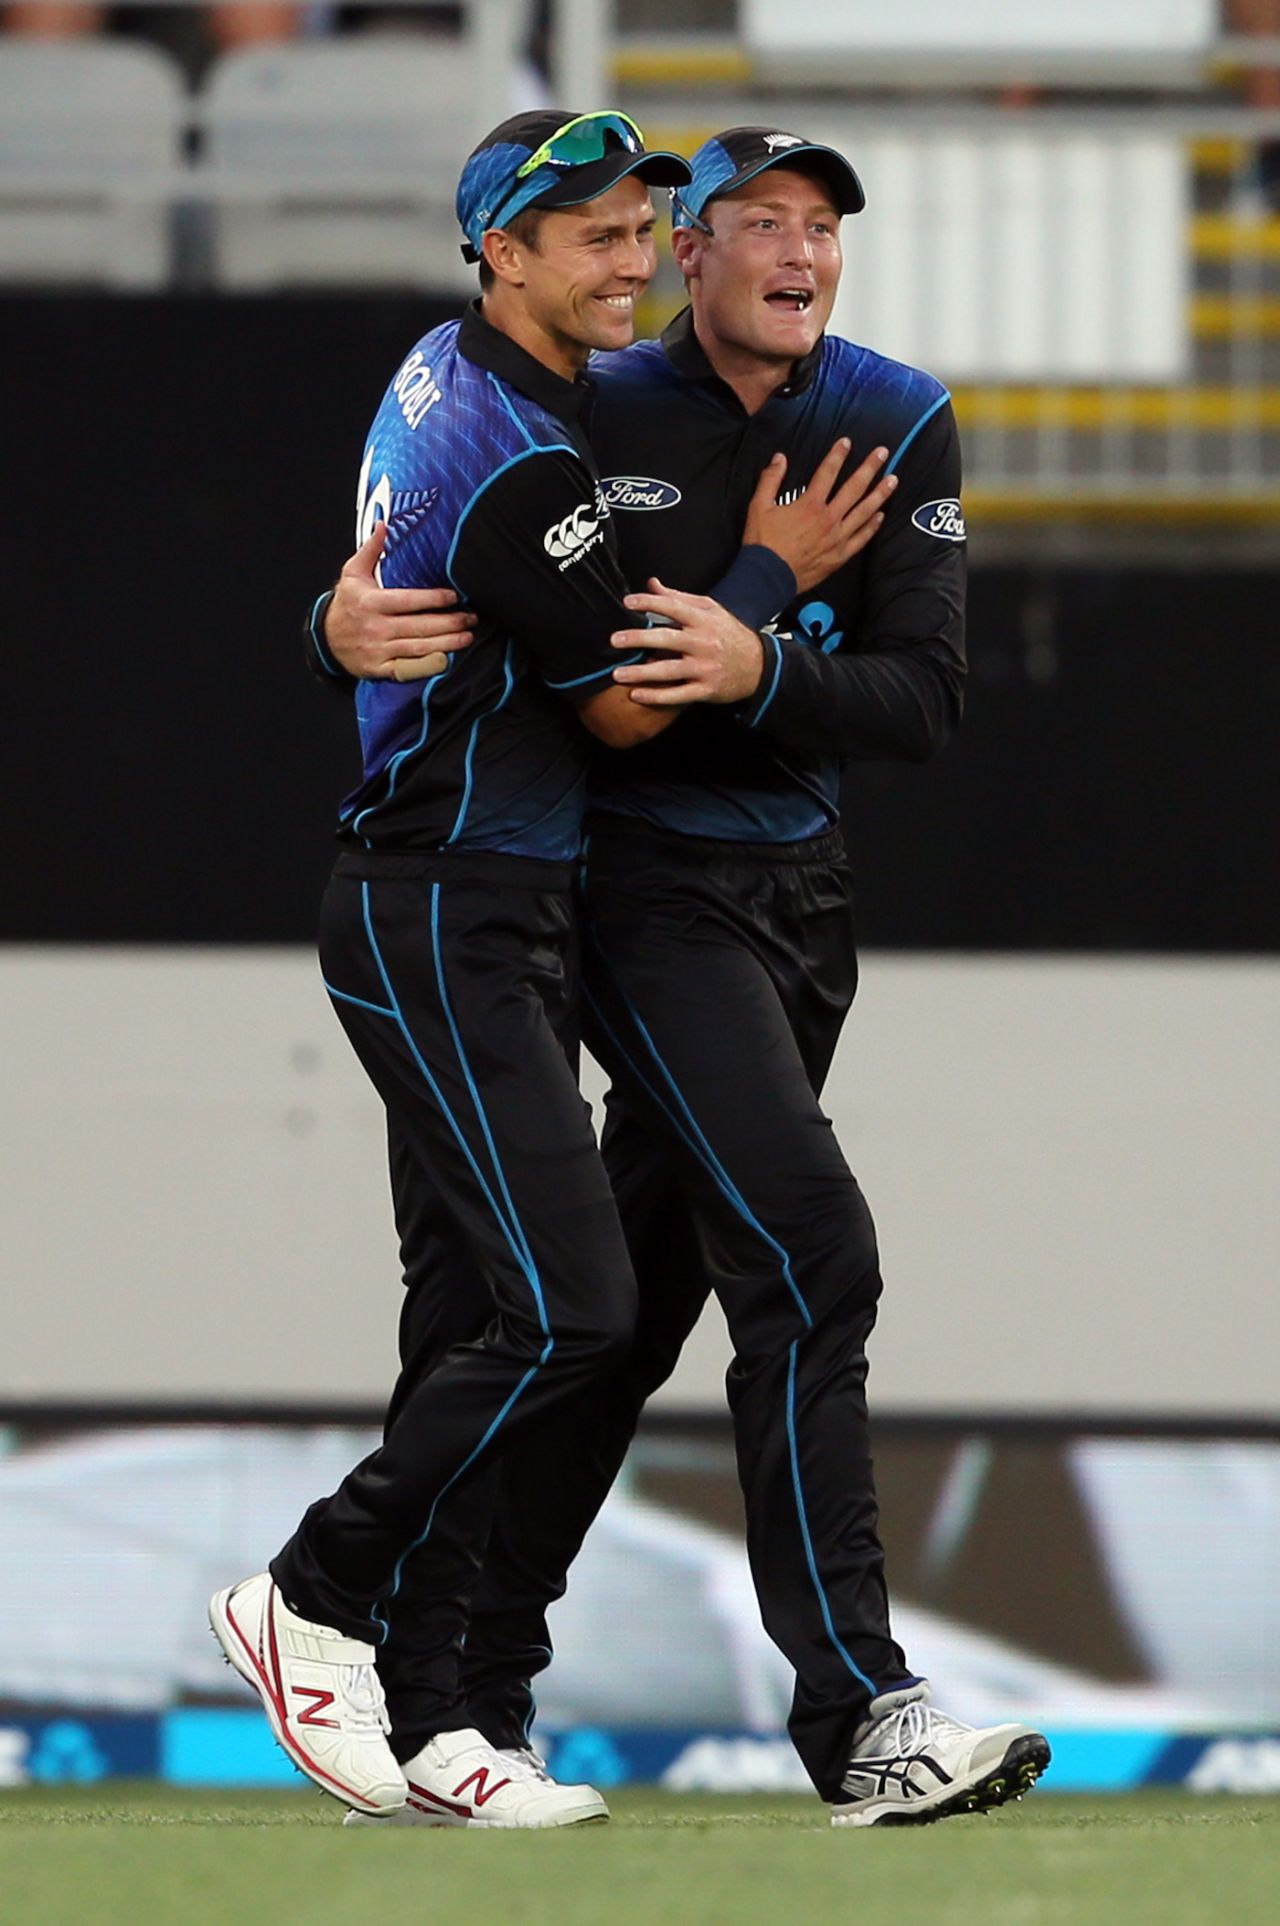 Trent Boult and Martin Guptill celebrate a wicket, Auckland, February 3, 2016
